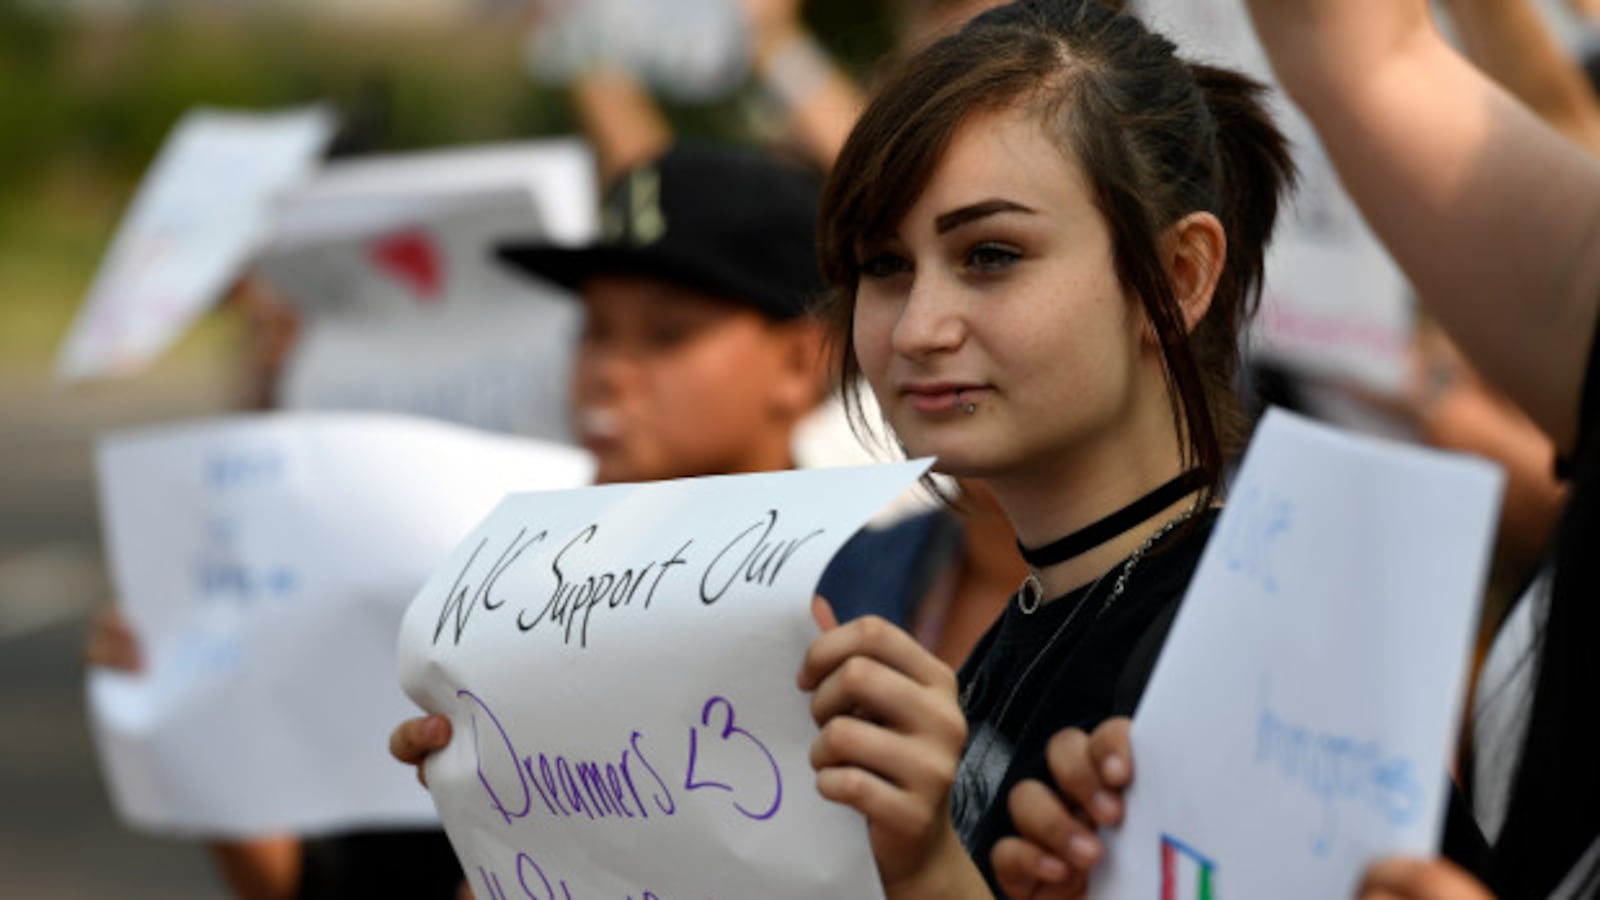 Arieona Duvall-Valverde, a ninth grader at Denver's North High, holds a sign in support of the Deferred Action for Childhood Arrivals program in September 2017.